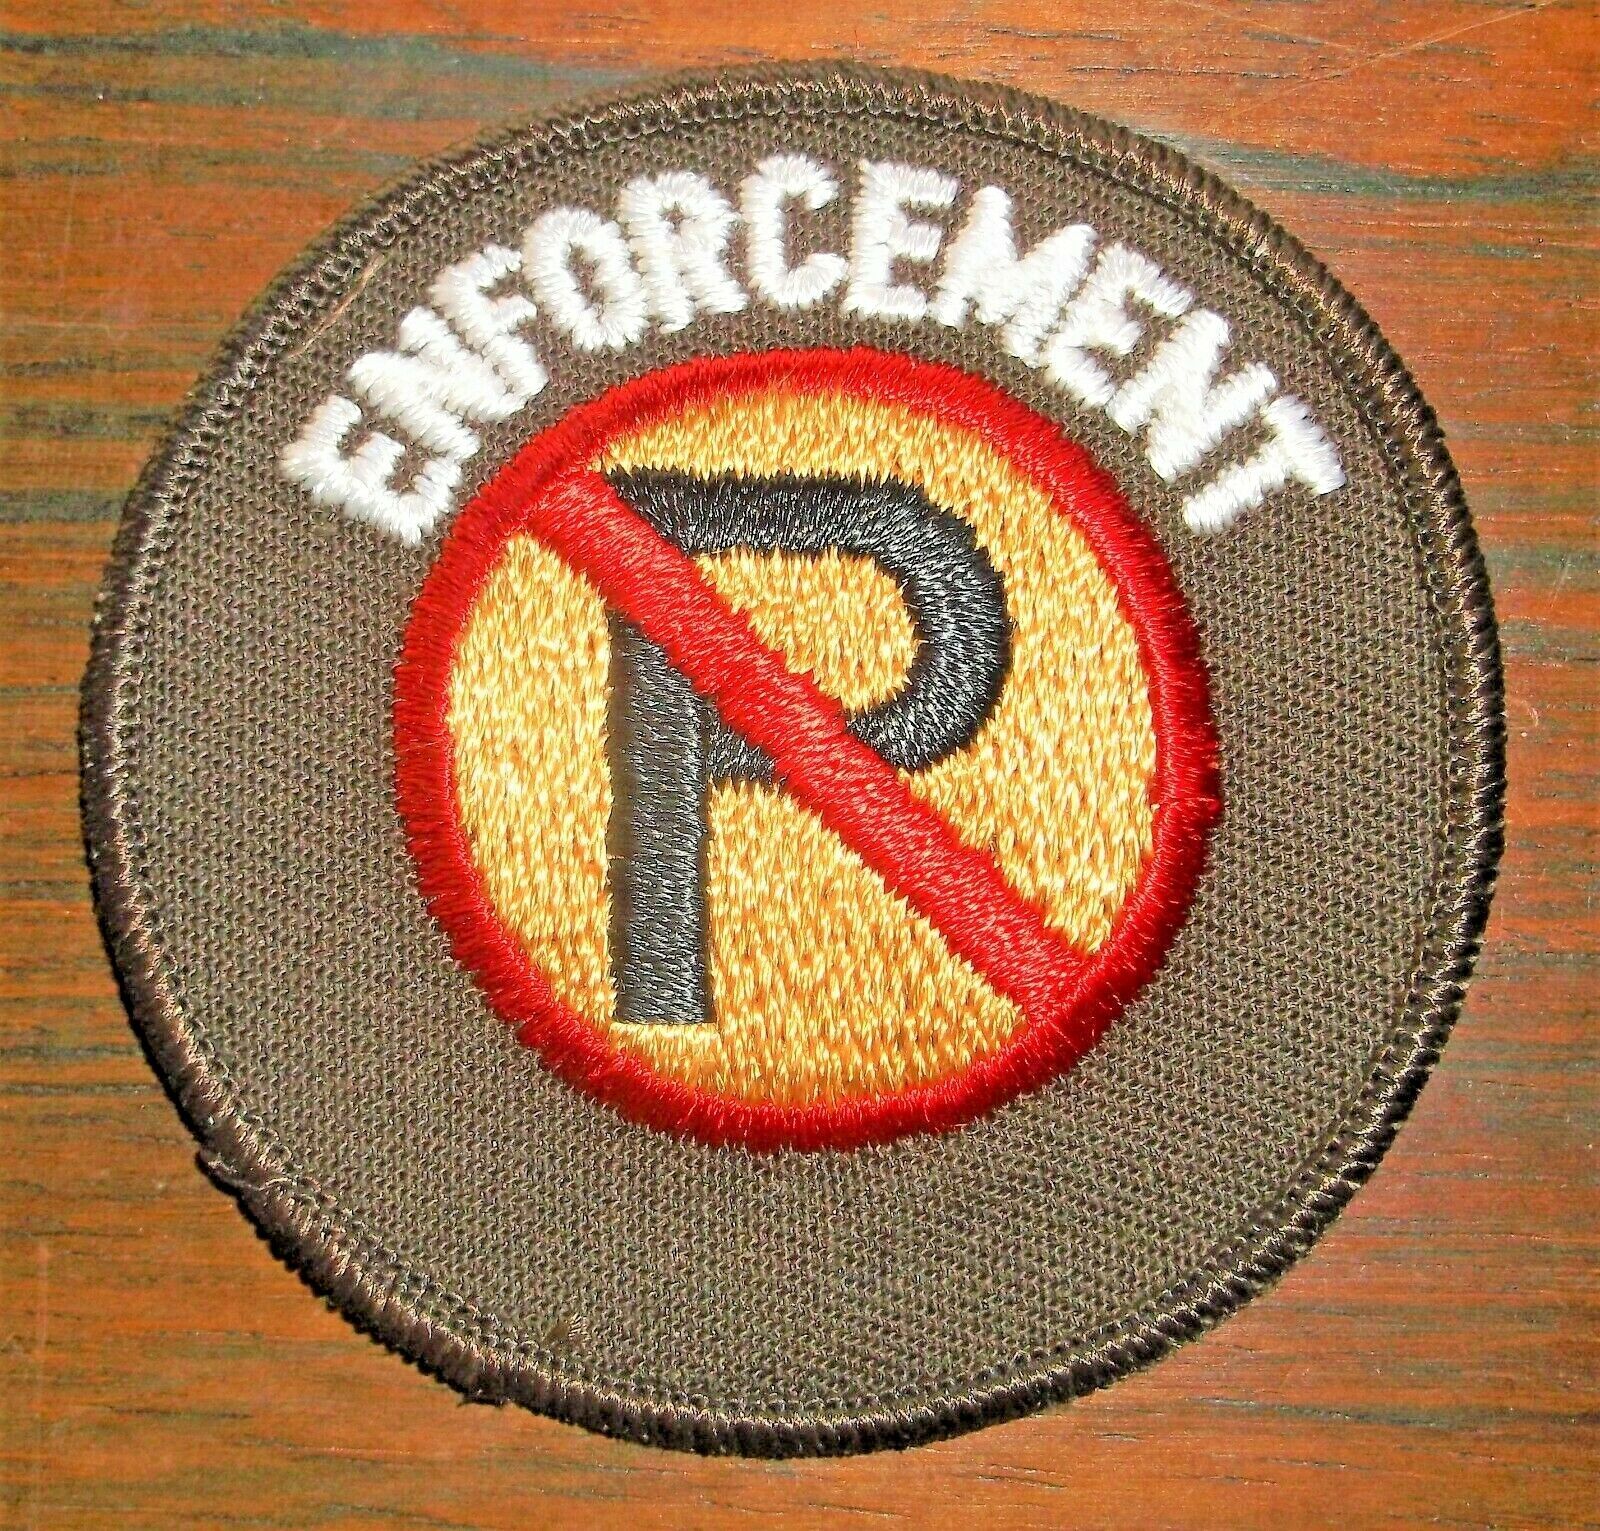 GEMSCO NOS Vintage Patch NYC DOT PARKING ENFORCEMENT NYPD NYC NY - Original 1984